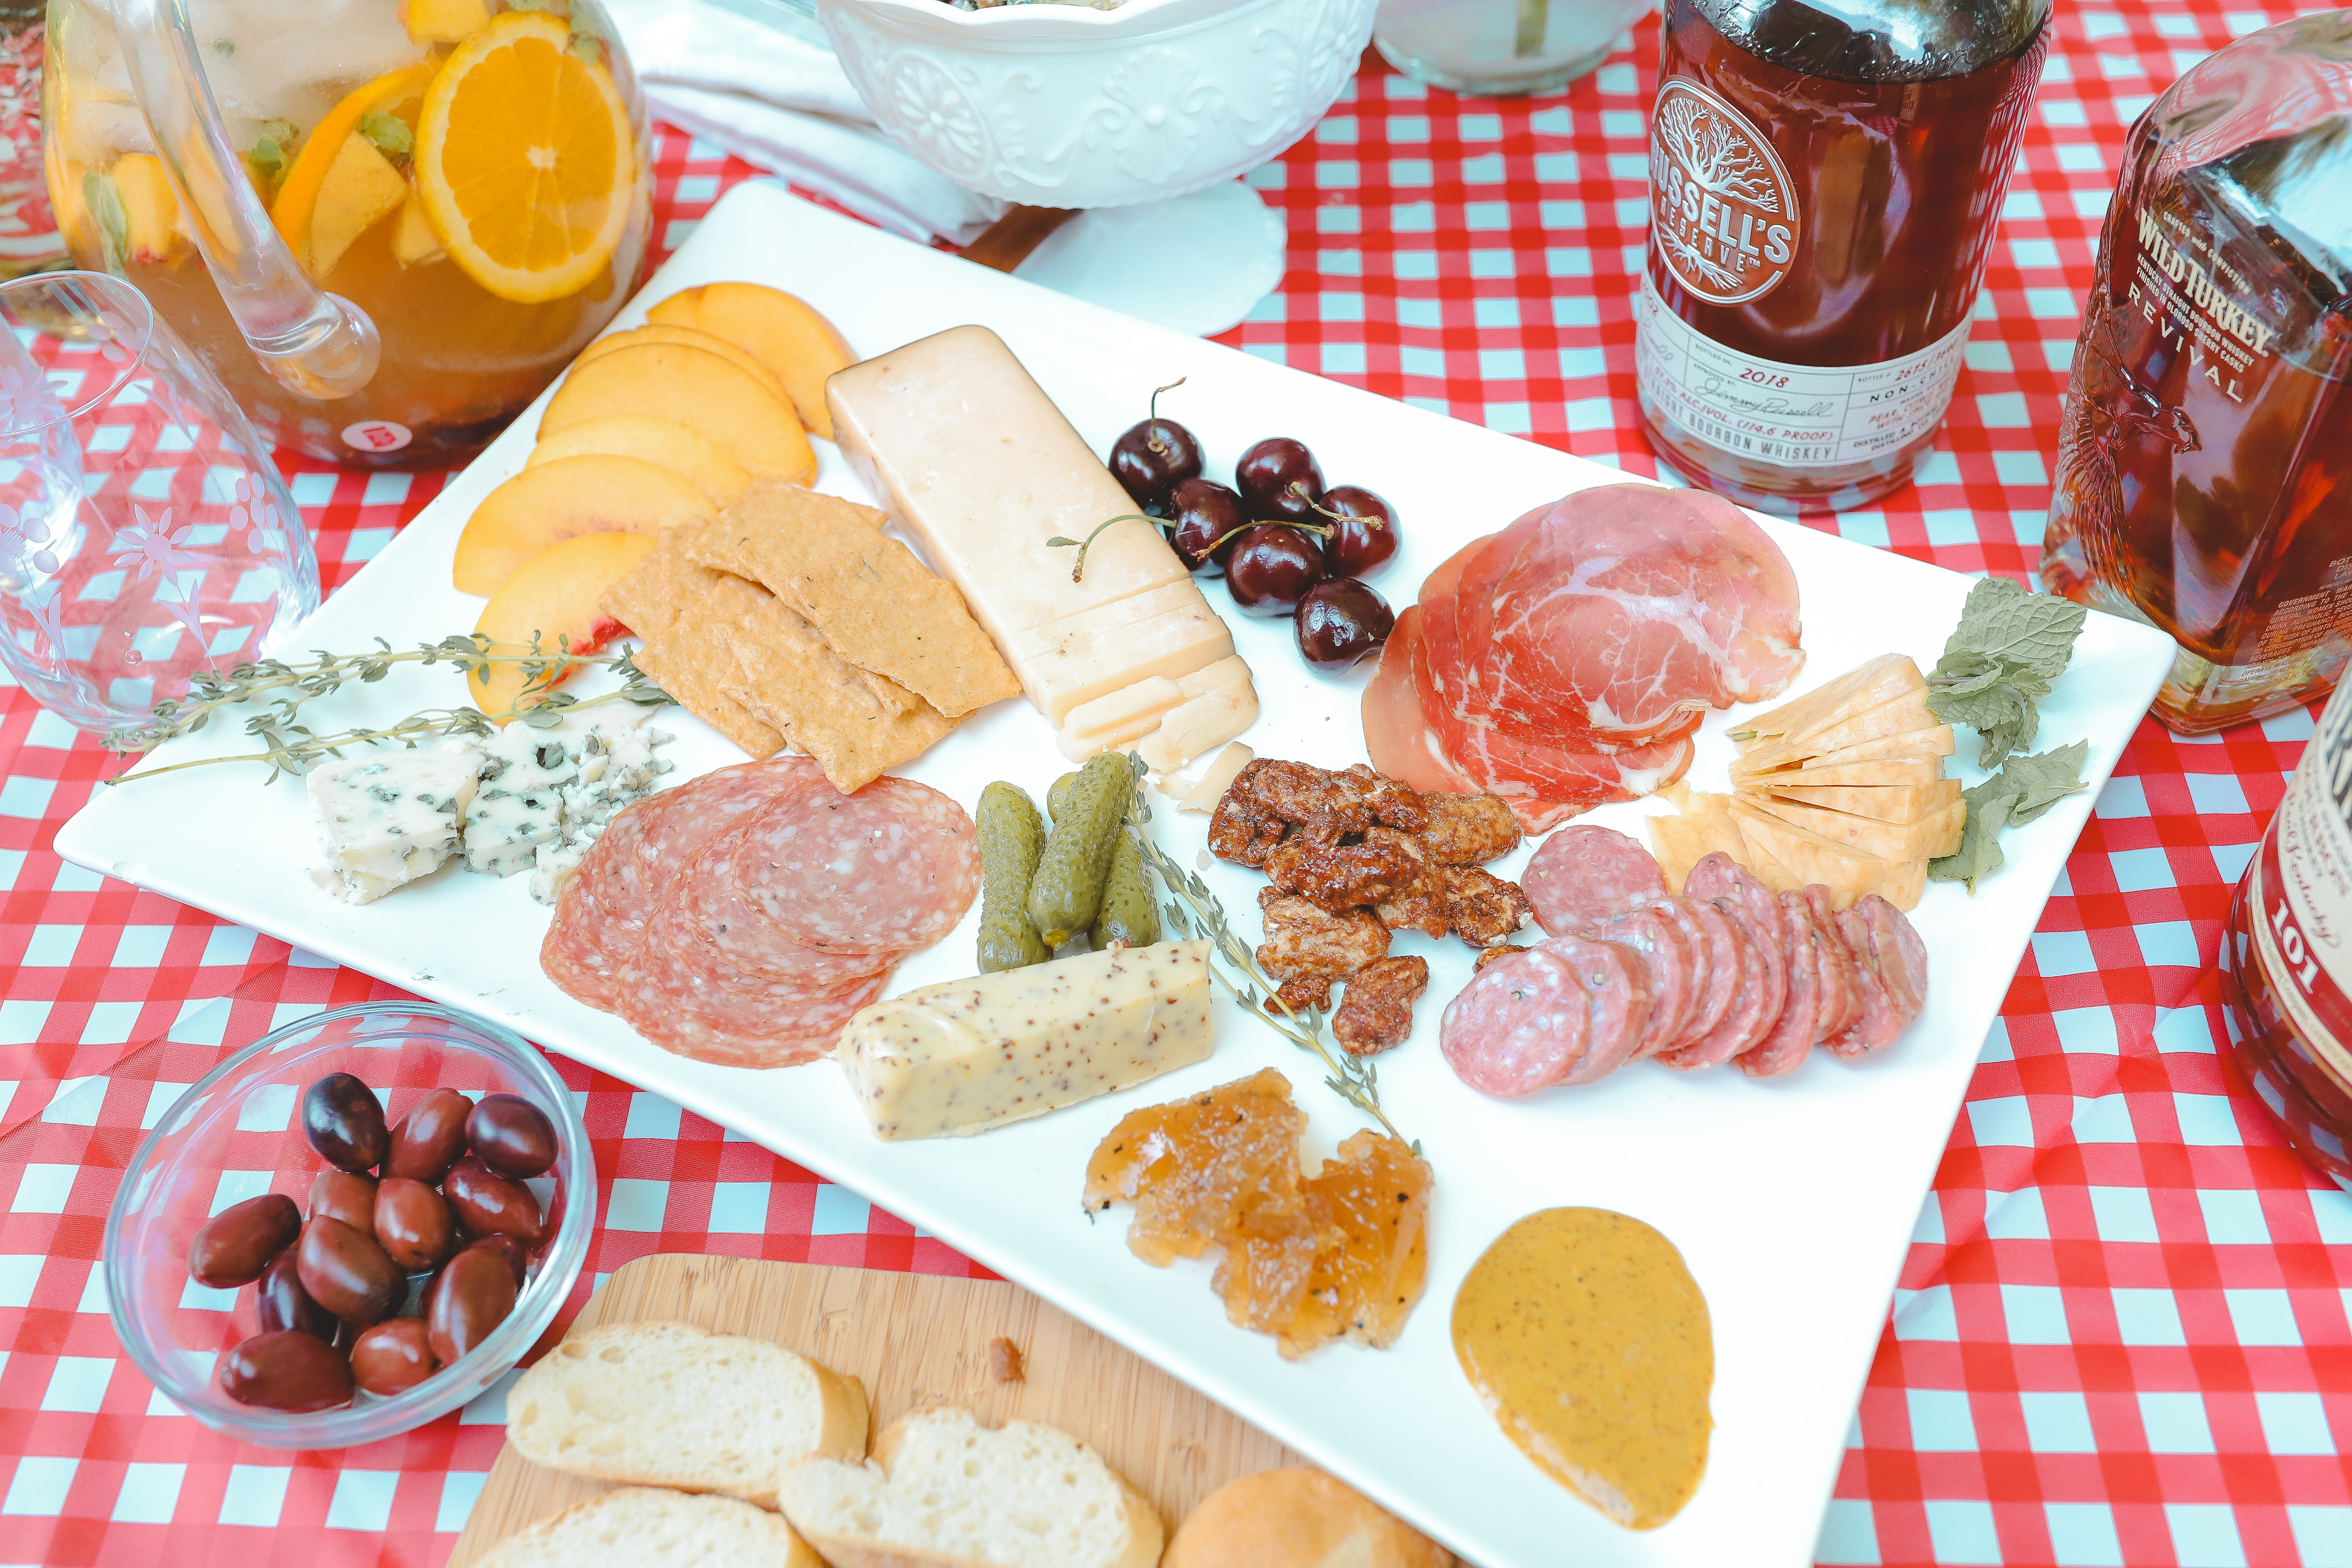 How to make a killer Charcuterie and Cheeseboard